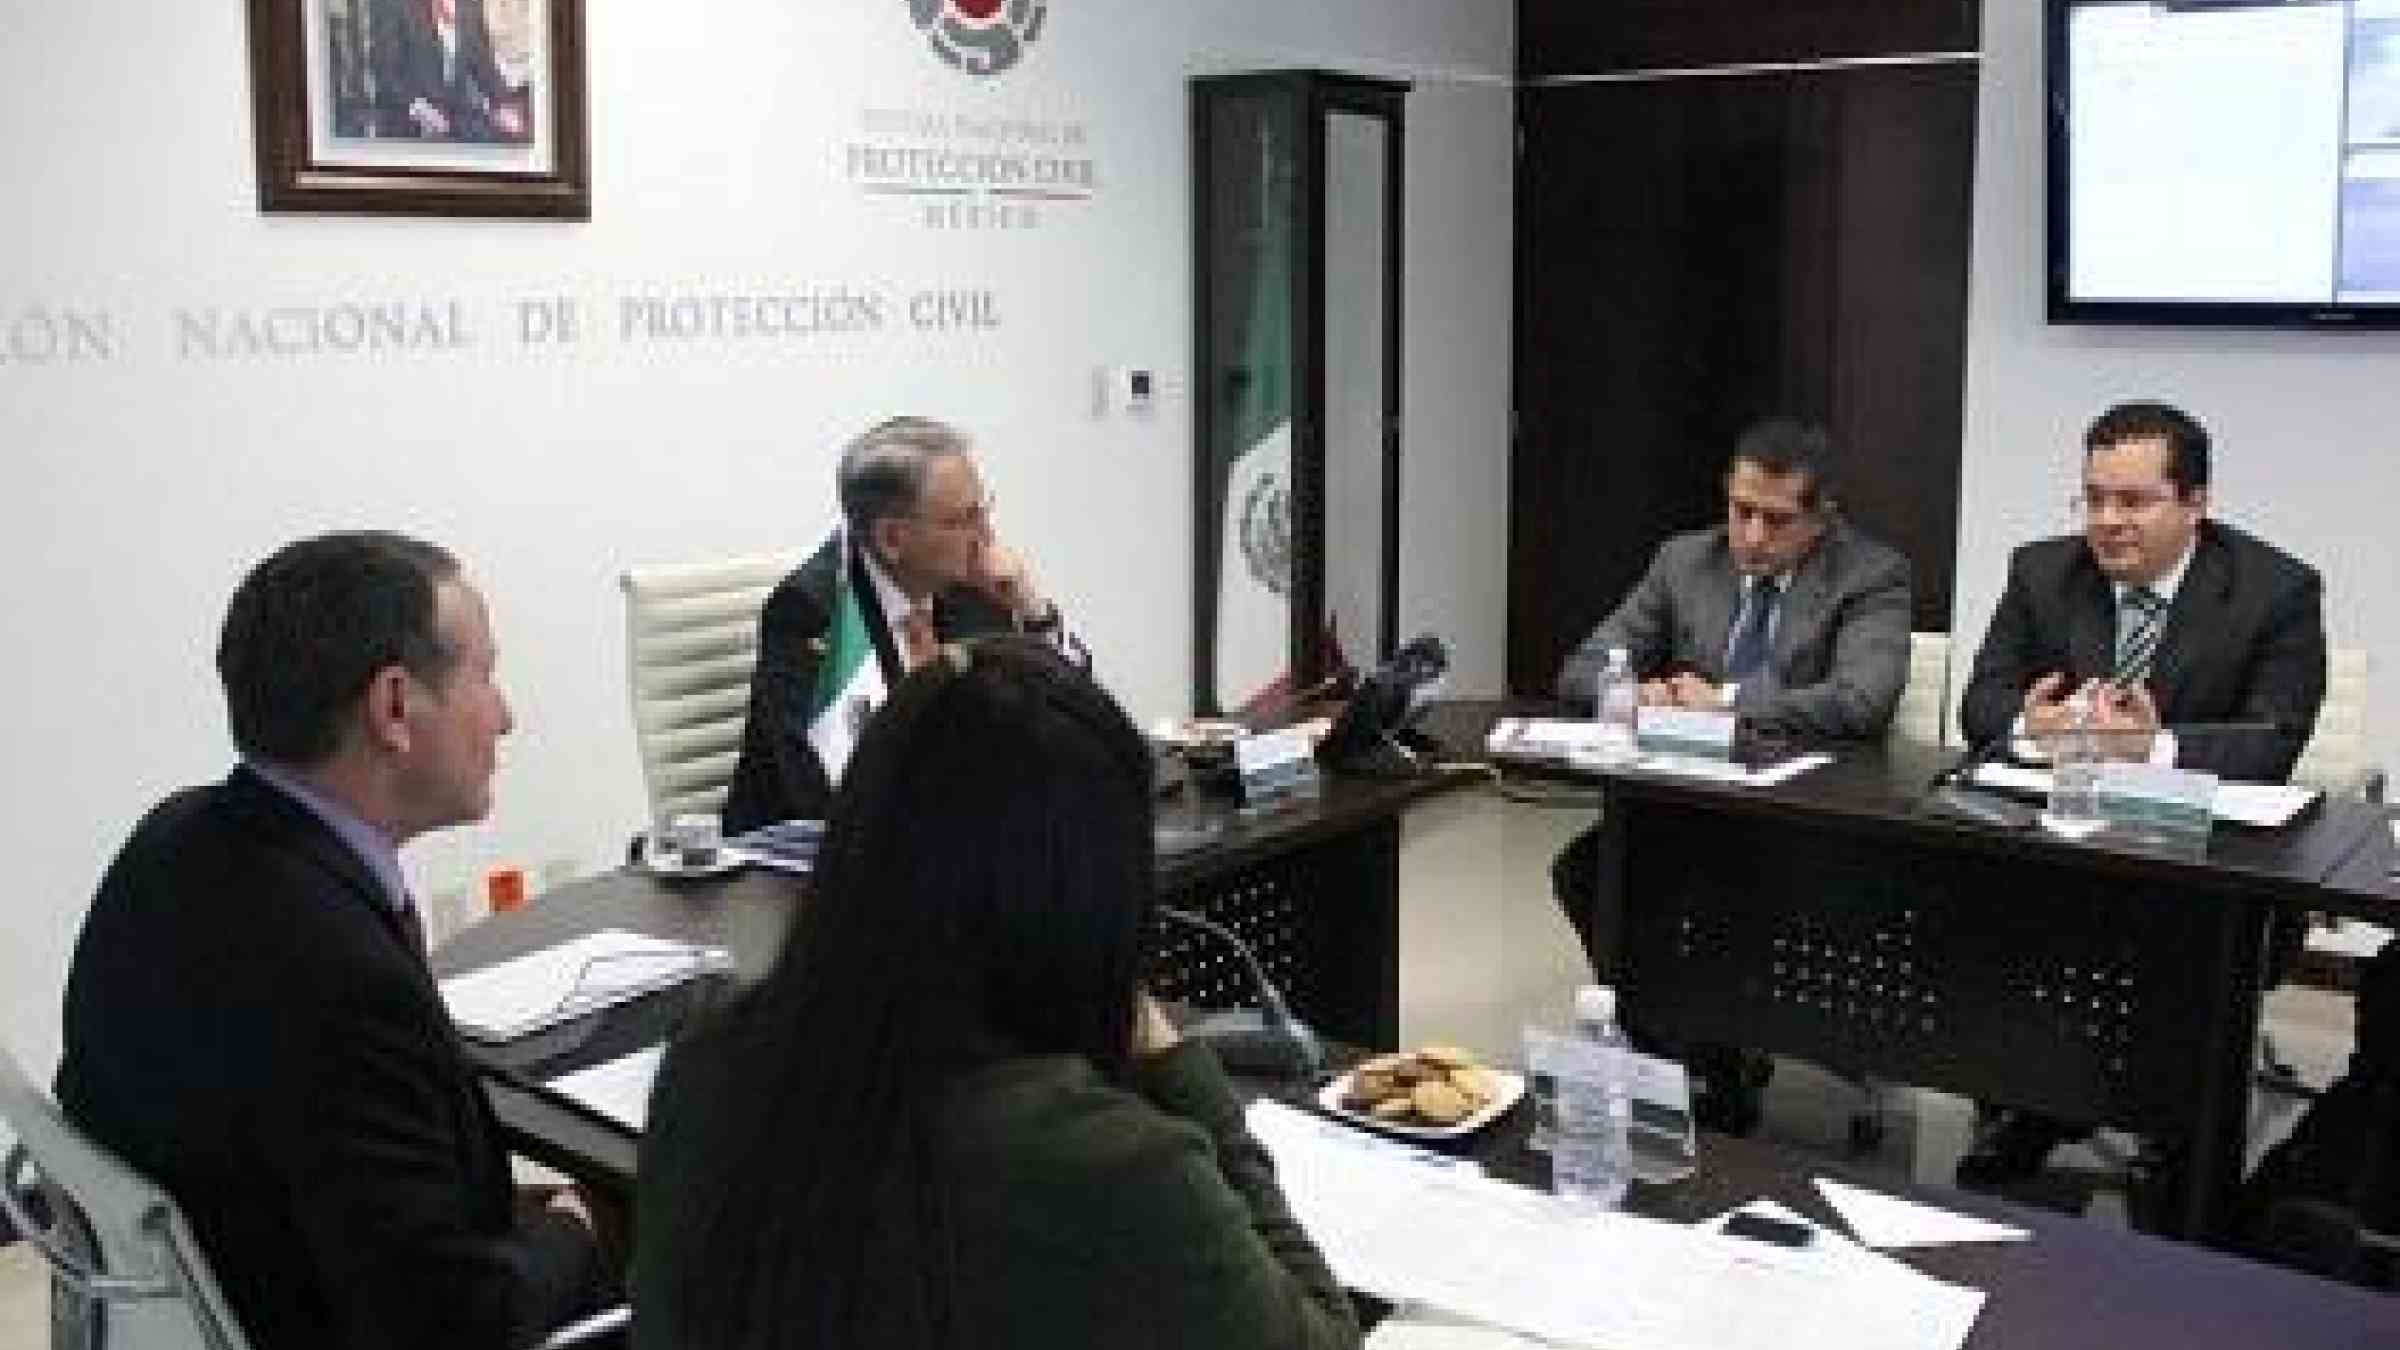 UNISDR chief Mr. Robert Glasser (left) meets with staff from Mexico's National Civil Protection System, including its head Mr. Luis Felipe Puente (centre left)